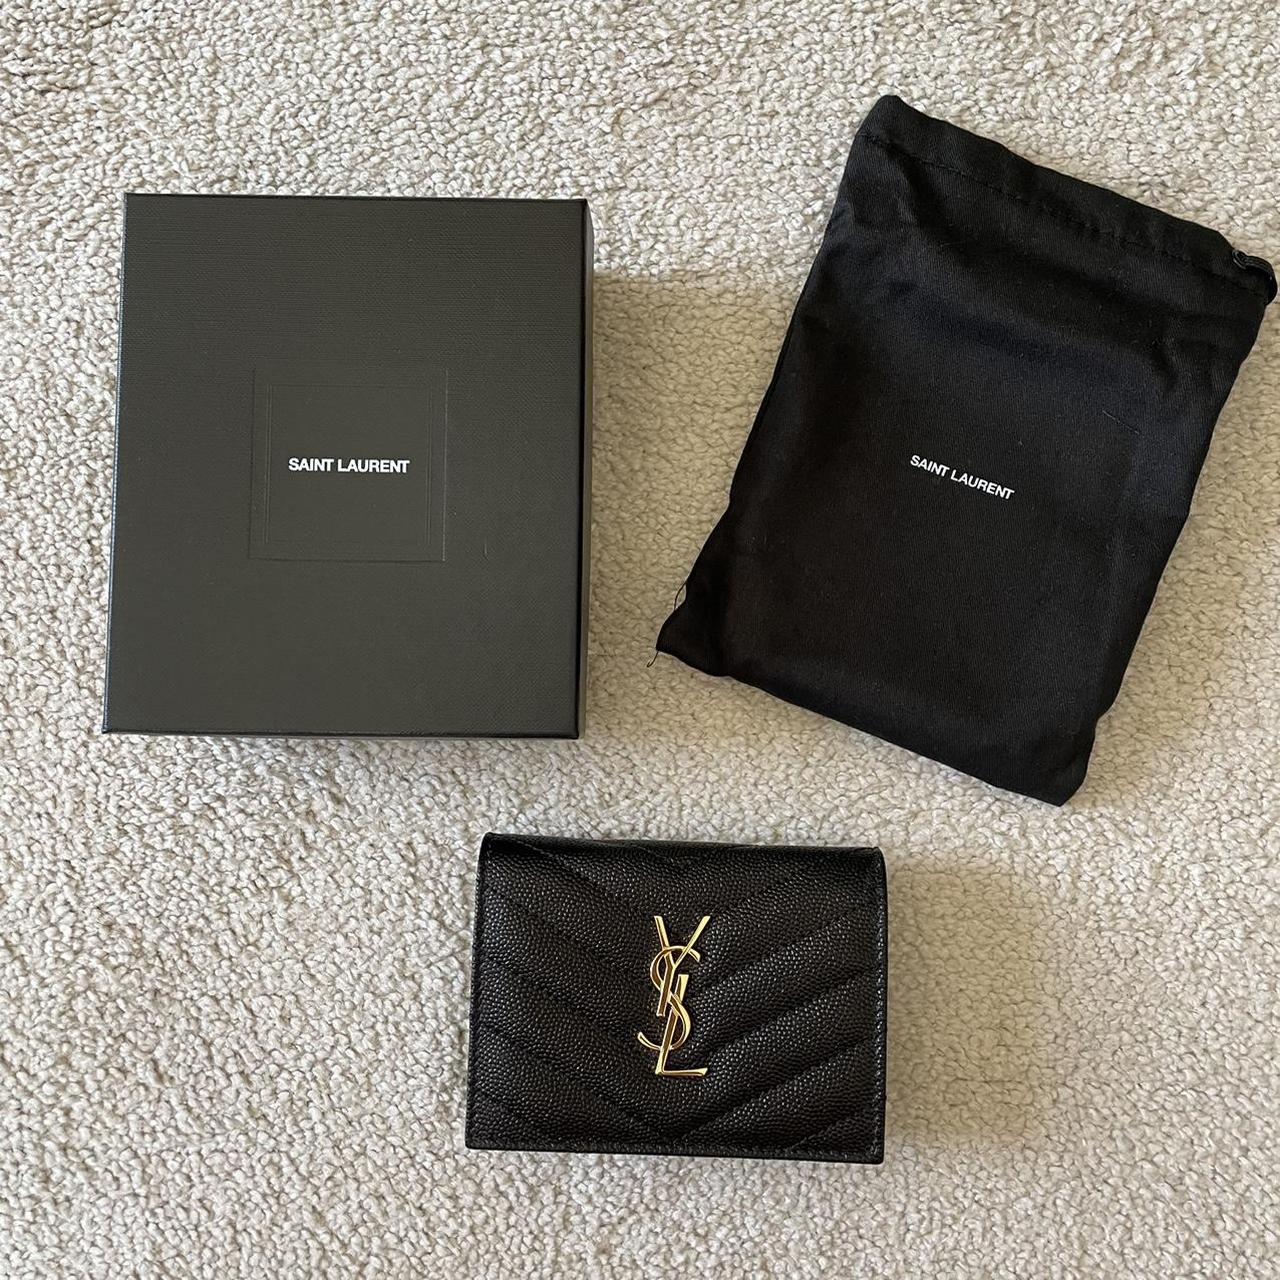 YSL wallet with box brand new olive green #ysl - Depop